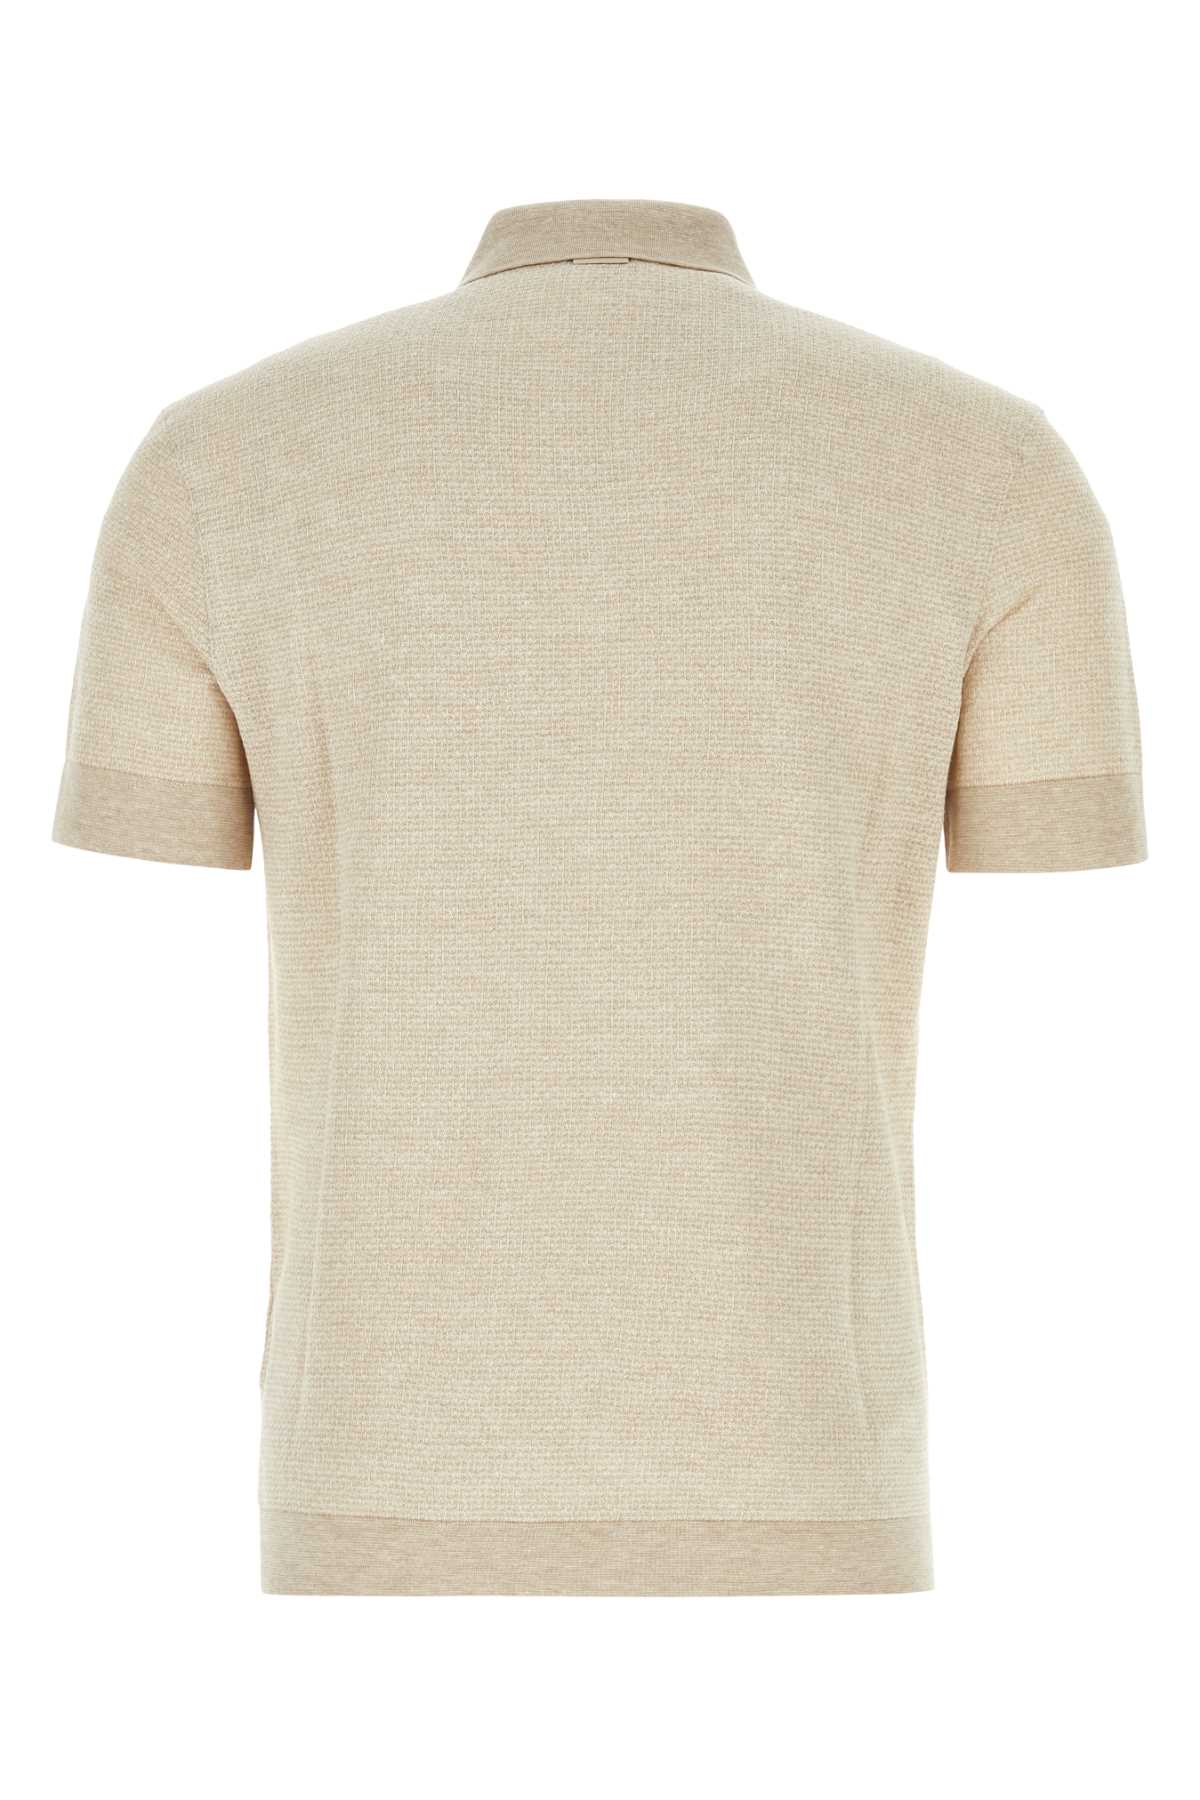 Zegna Sand Cotton Blend Polo Shirt In N03